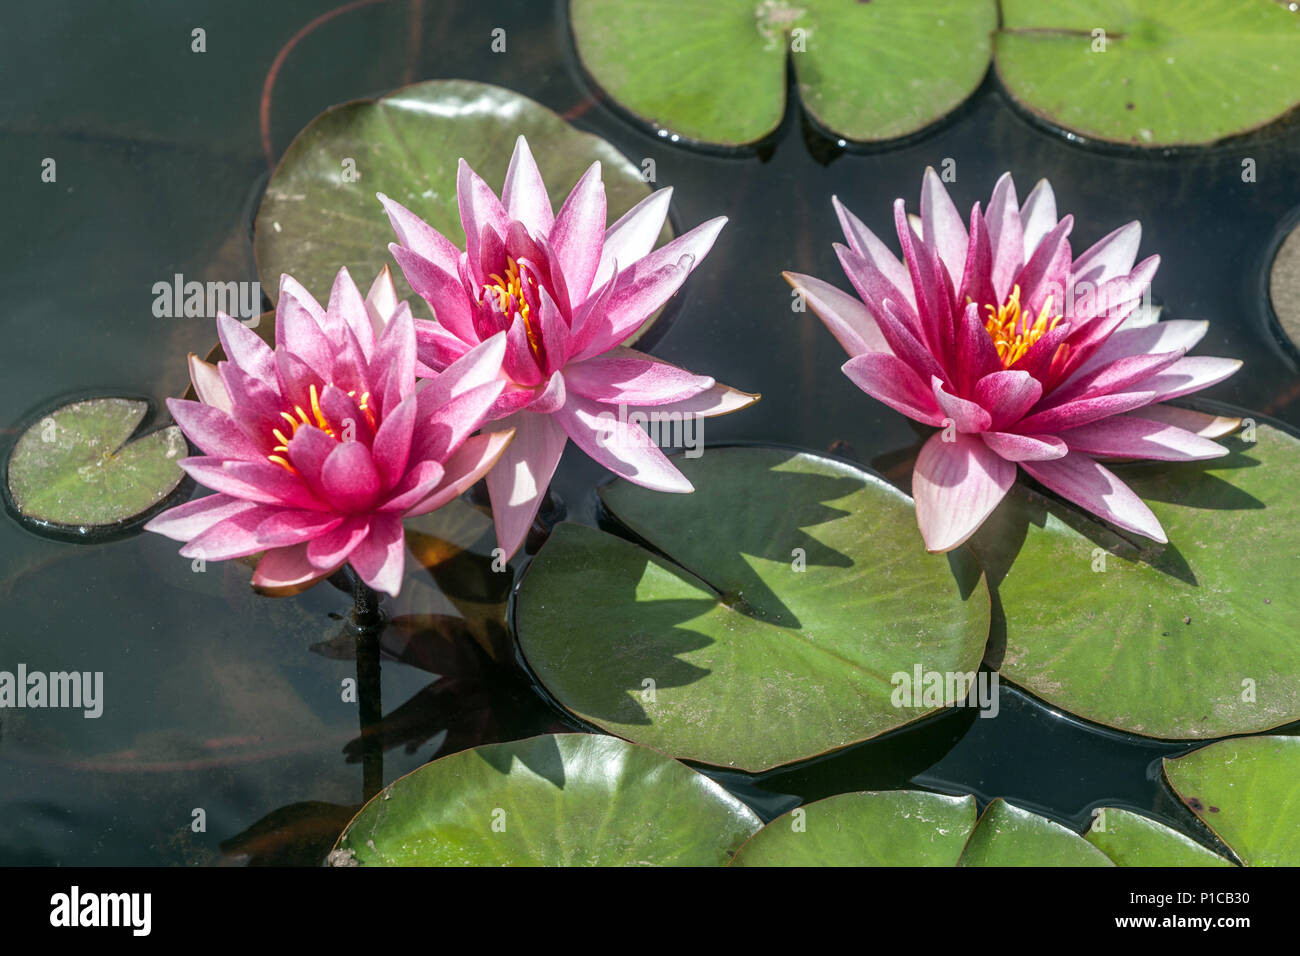 A pink Hardy Water Lily flowers in water, garden pond Stock Photo